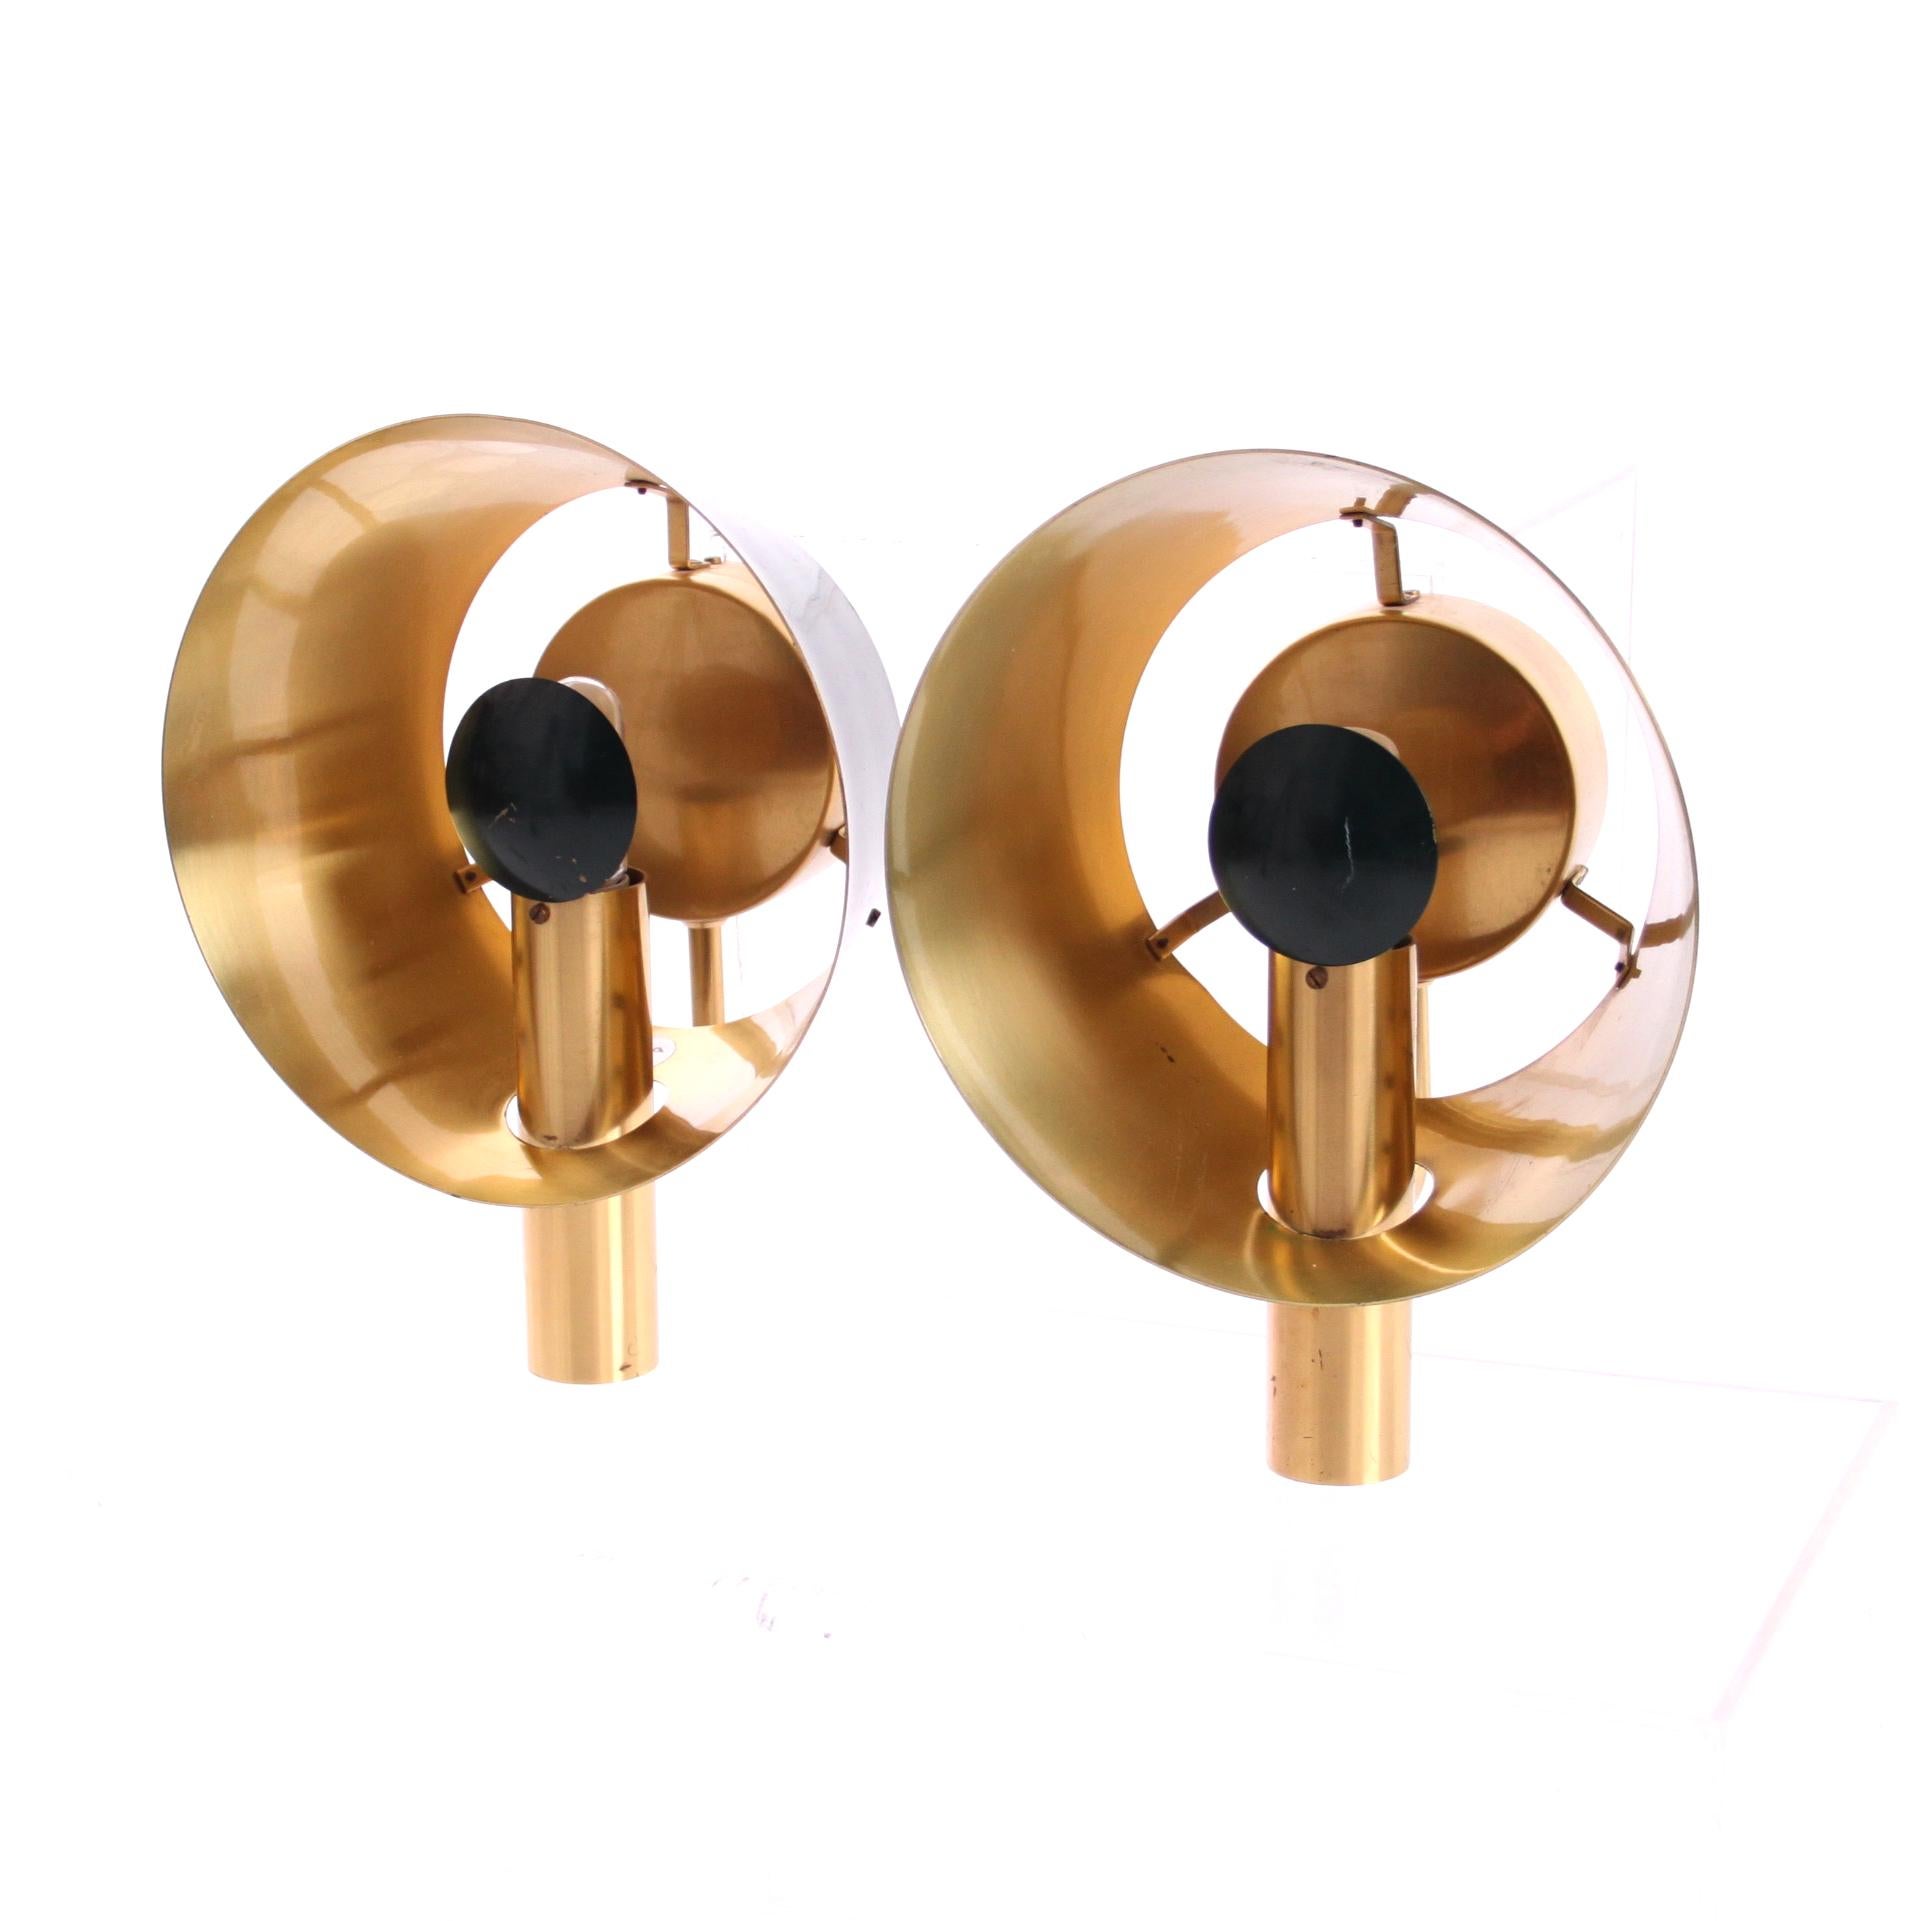 A pair of decorative wall lights by LYFA that project beautiful sculptural light on the wall. 

The lights are made of brass and green lacquered surfaces. They are manufactured by LYFA Denmark in the 1960s. 

LYFA is renowned for manufacturing